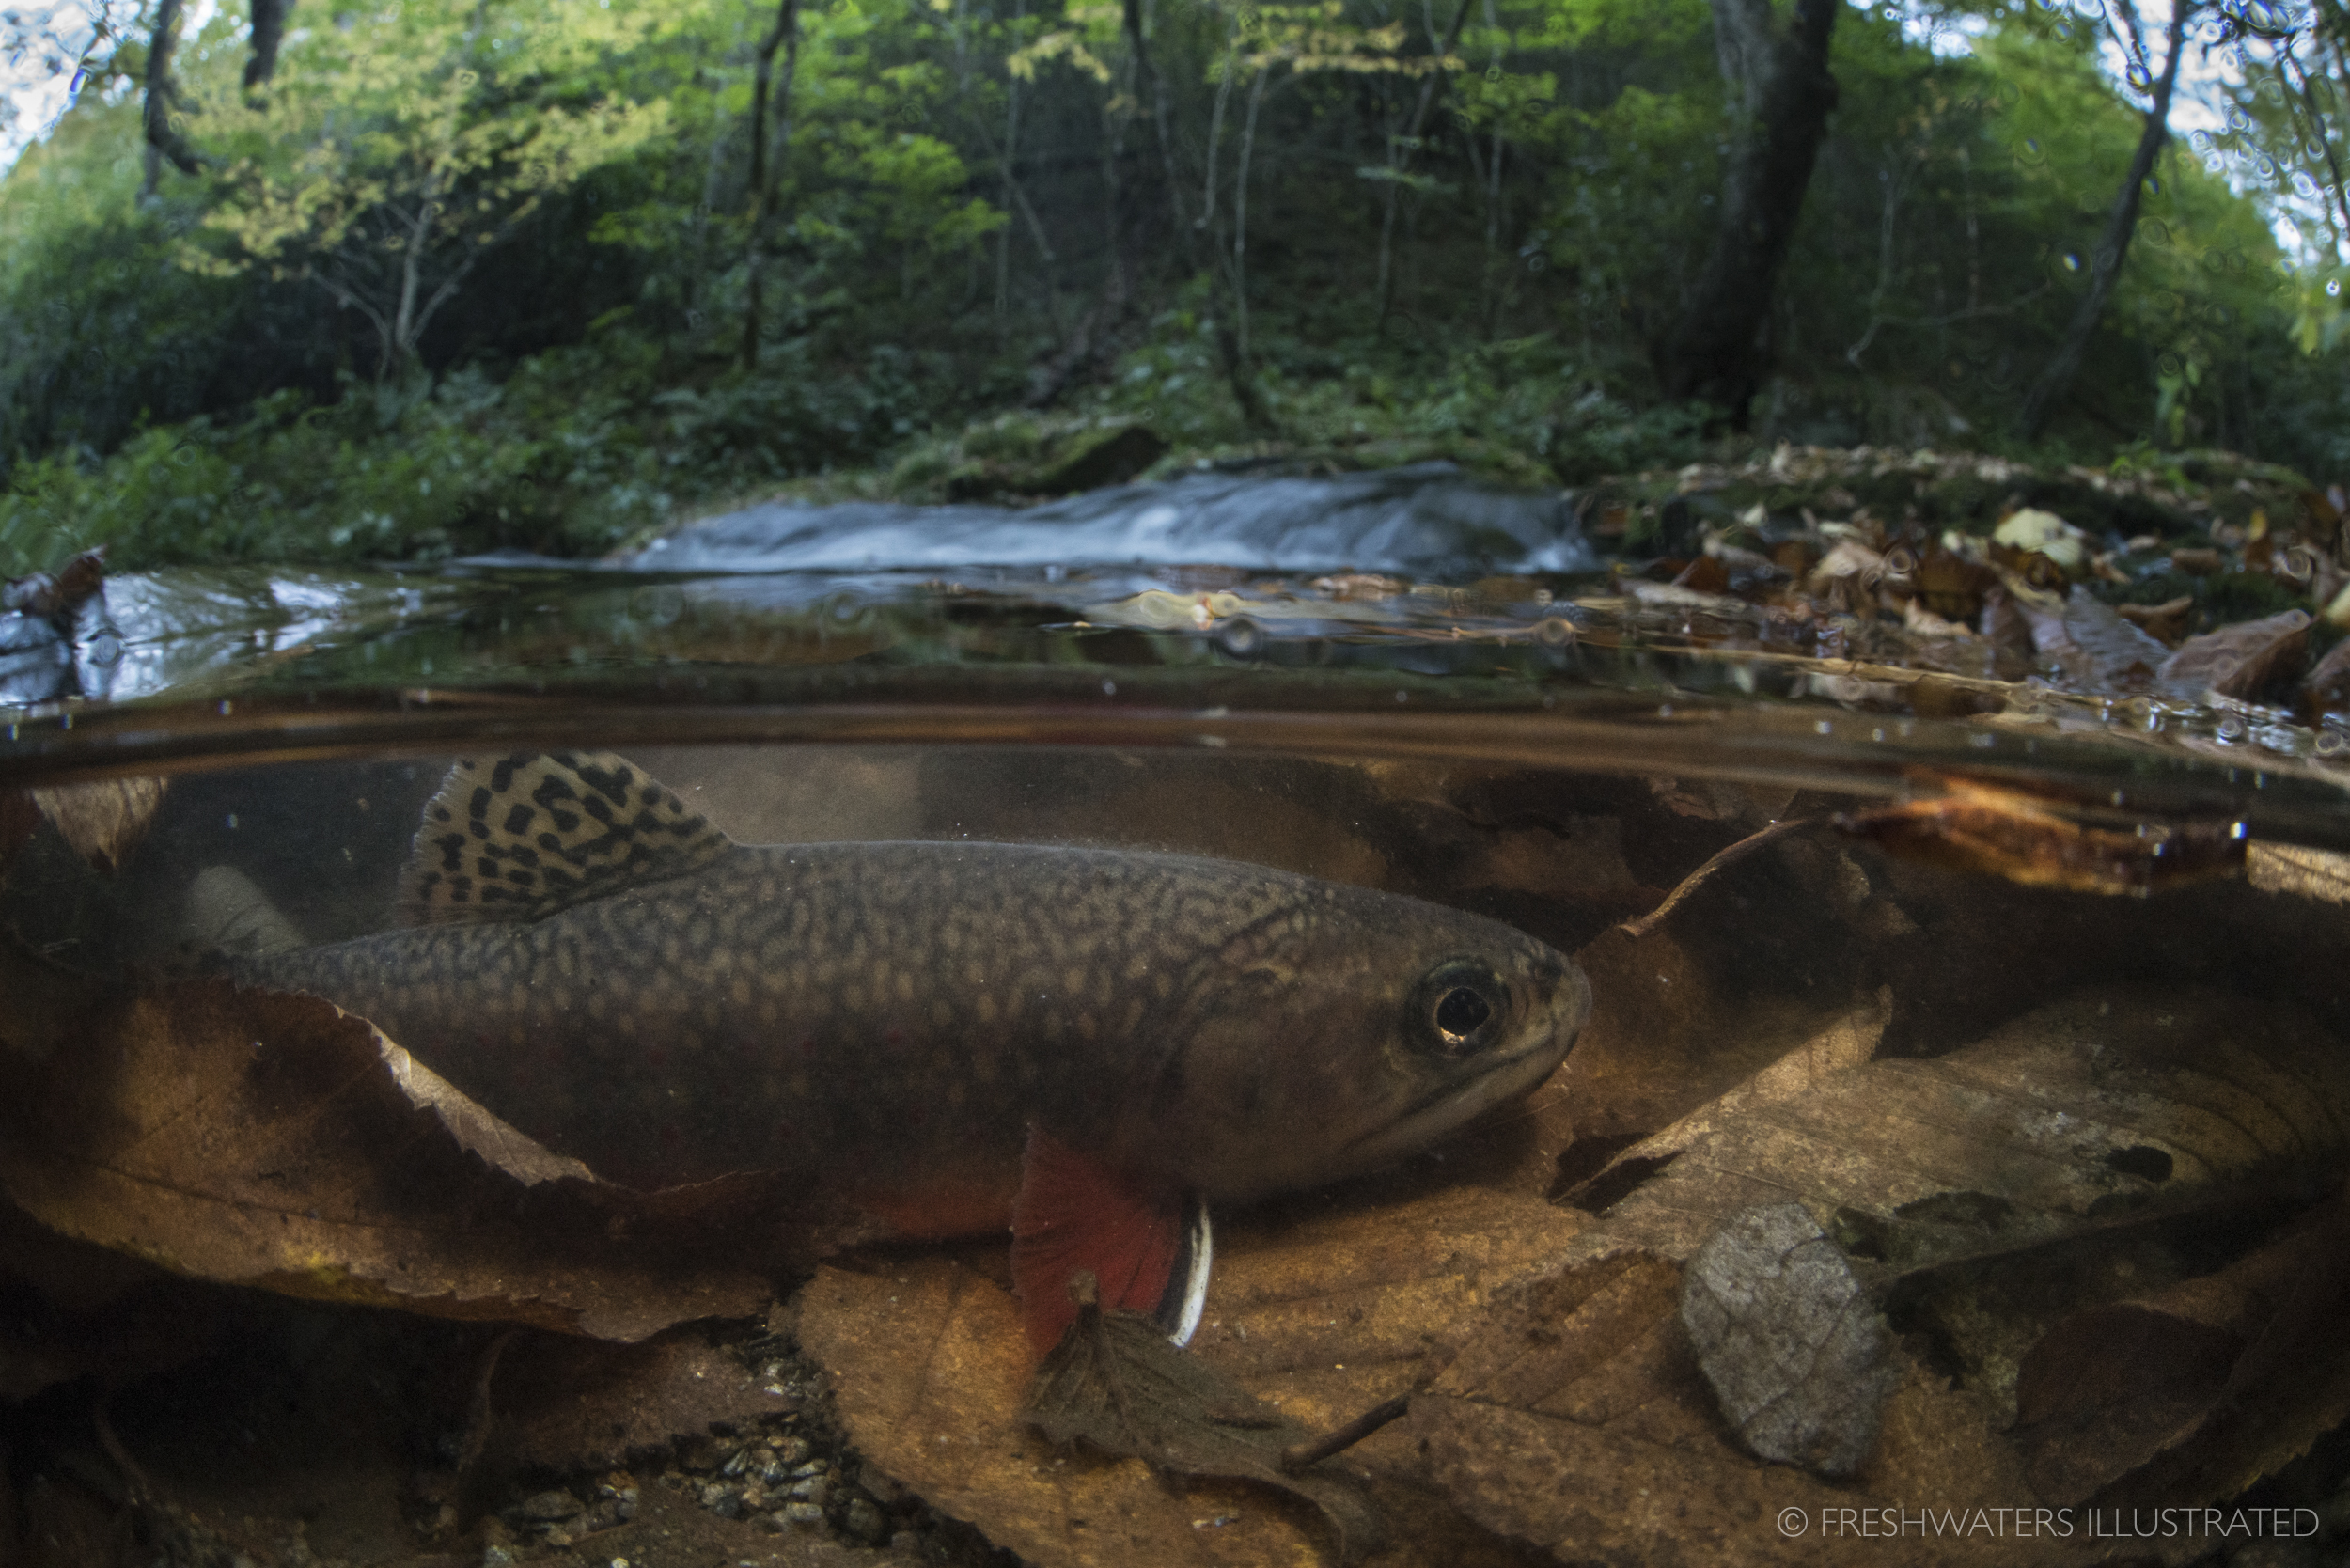  A Southern Appalachian brook trout hides within a layer of freshly fallen leaves in the Great Smoky Mountains National Park. Nearly wiped out, these iconic fish are now making a comeback. Smoky Mountain National Park, Tennessee  www.FreshwatersIllus